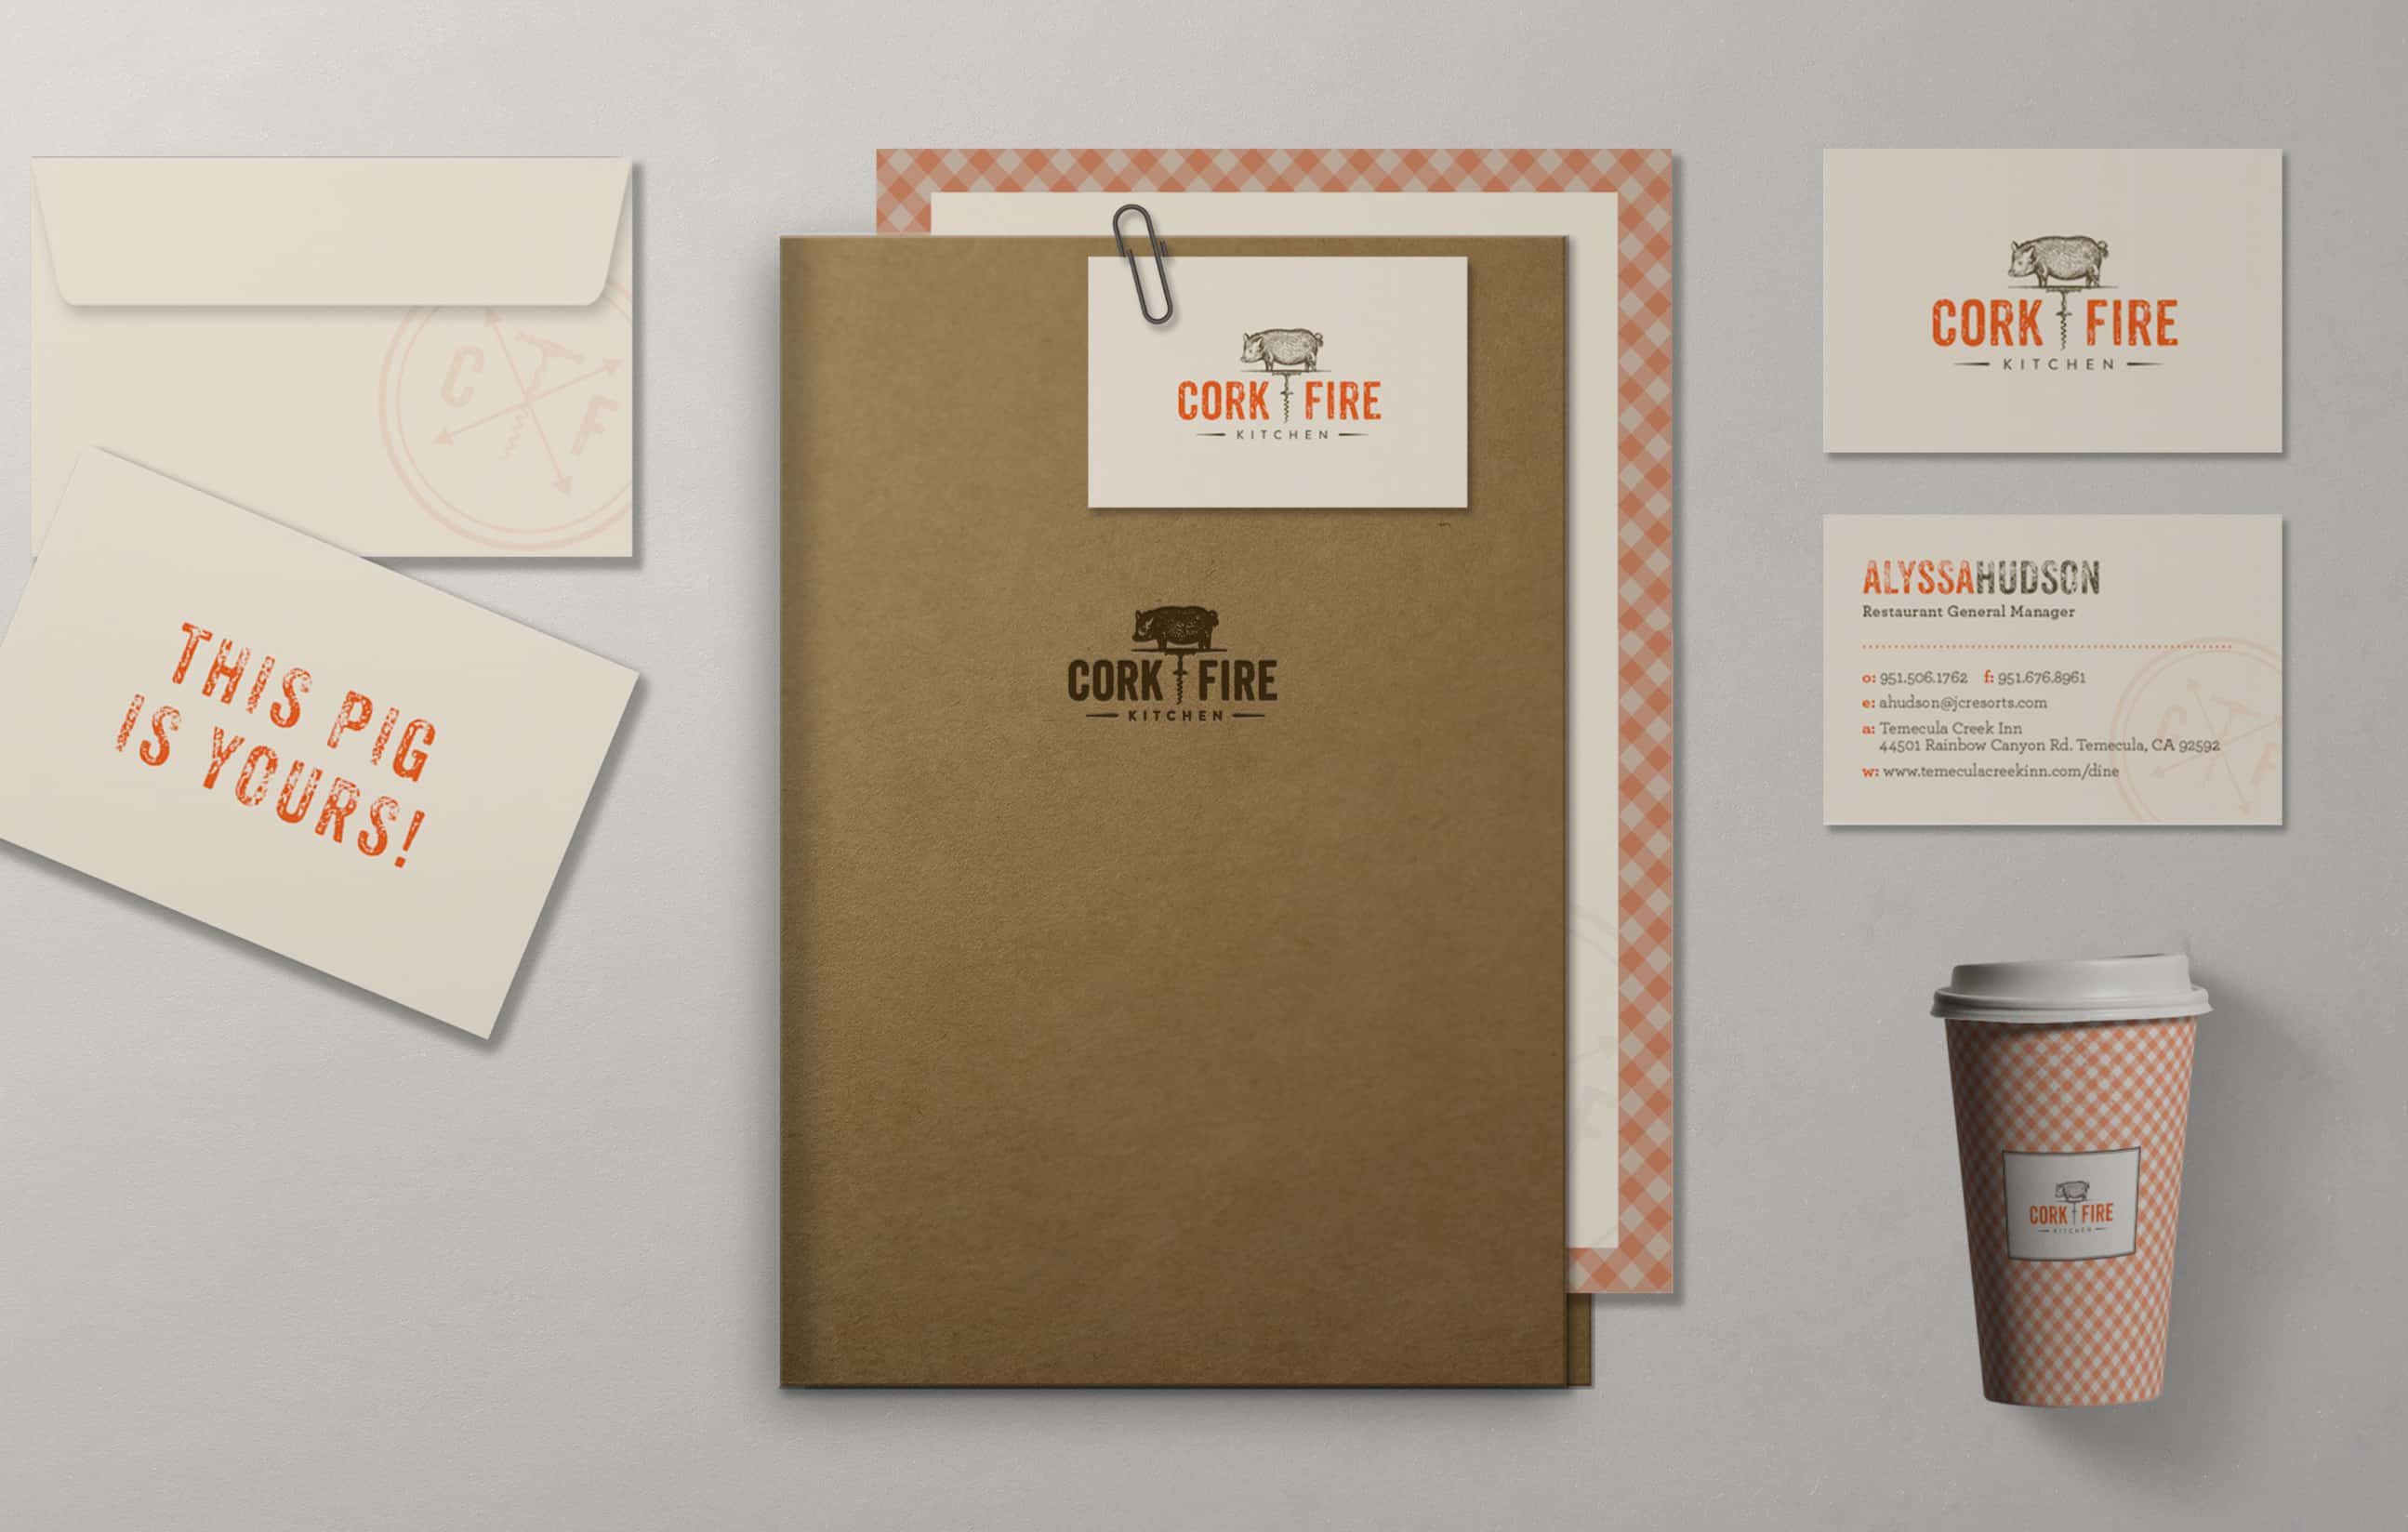 Branding materials for 'CORK & FIRE' displayed on a wall, including a kraft paper menu, a business card, a coffee cup with a checkered pattern, and a promotional card stating 'This pig is yours!'